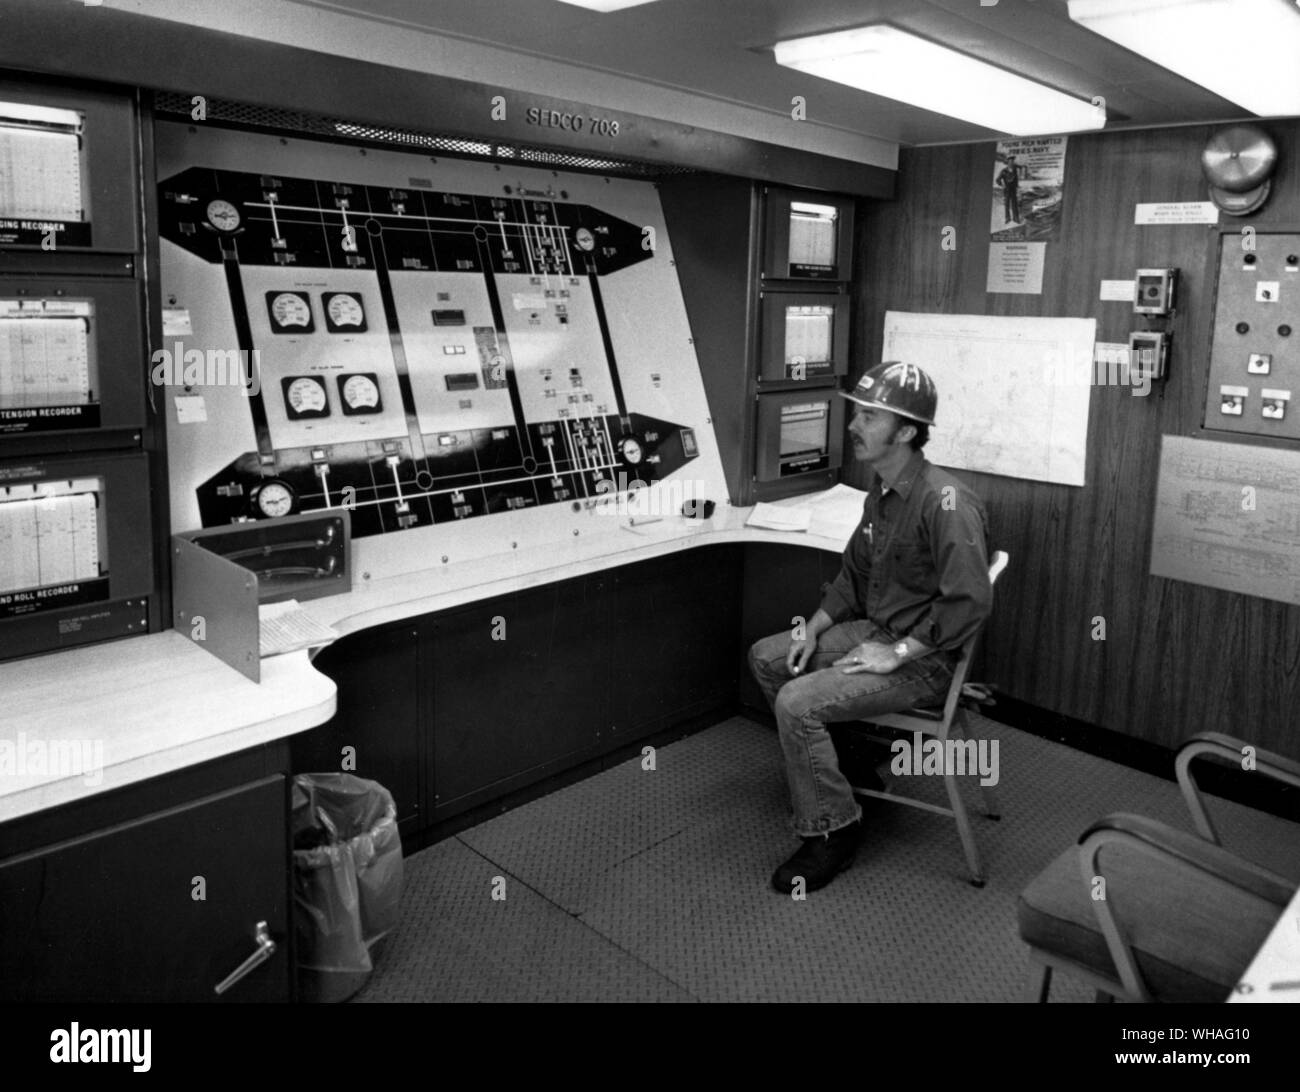 Control room on board drilling platform Sedco 703 (on long term charter to BP) north east of the Shetland Islands. 1974 Stock Photo